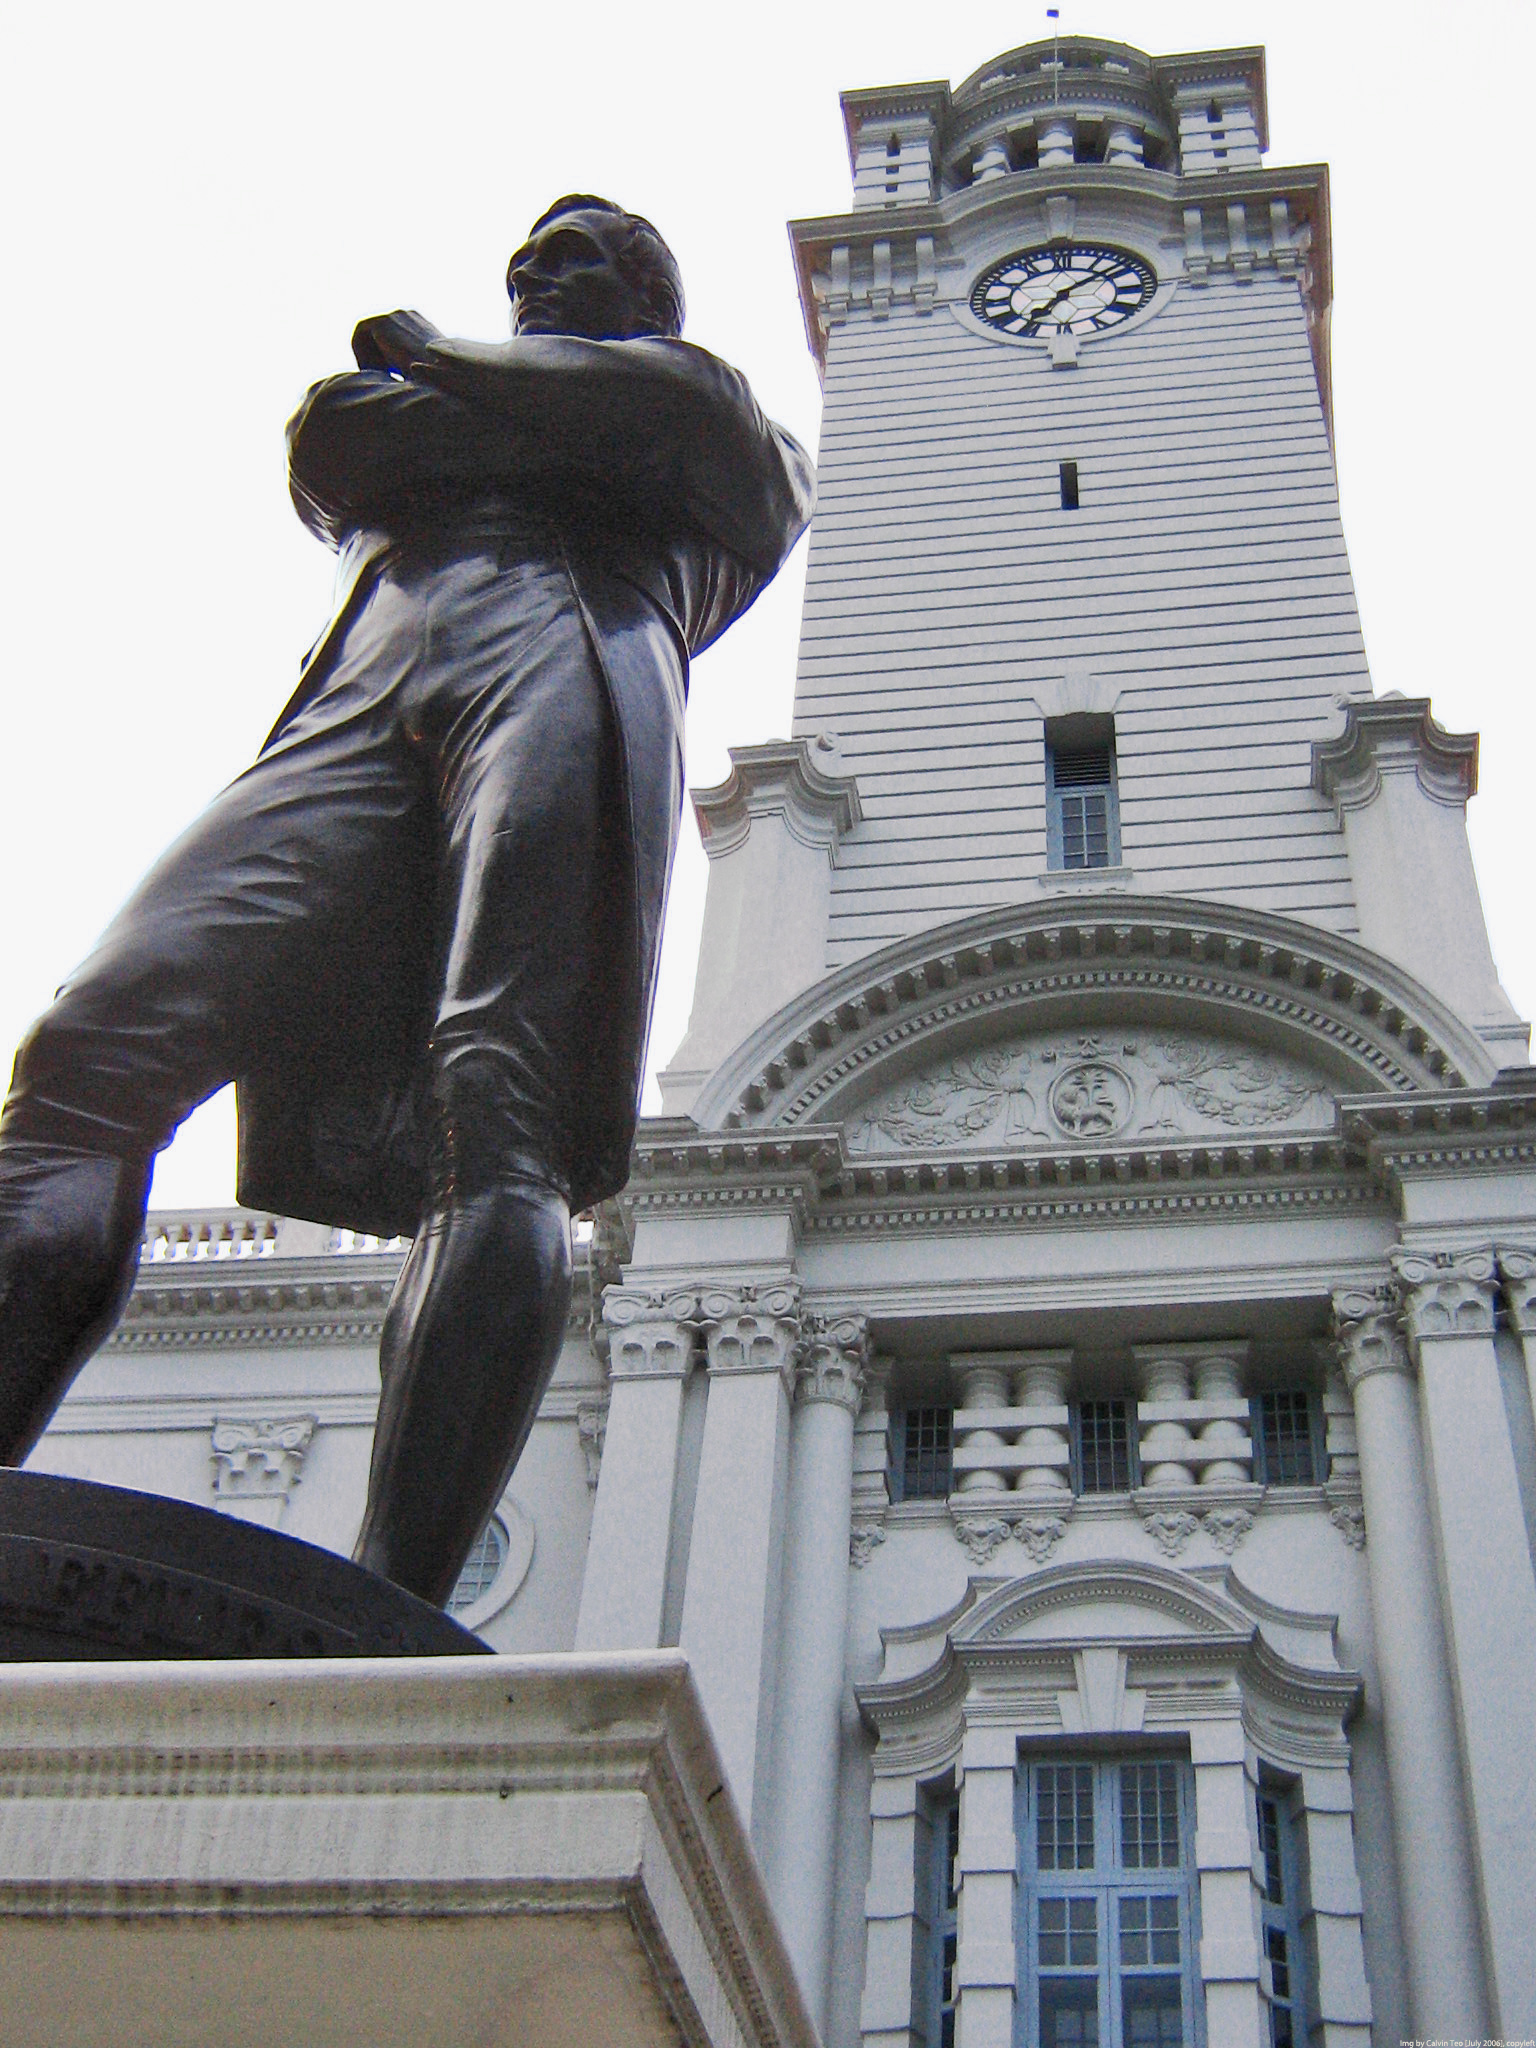 Statue of Stamford Raffles by Thomas Woolner in front of the clock tower of the Victoria Theatre and Concert Hall in Singapore (originally called Victoria Memorial Hall). On February 6, 1919, during celebrations of the centenary of Singapore's founding,this statue was moved from the Padang to the front of the Memorial Hall. The statue was complemented with a new semicircular colonnade and a pool. Photo taken by Calvin Teo on July 6, 2006. 